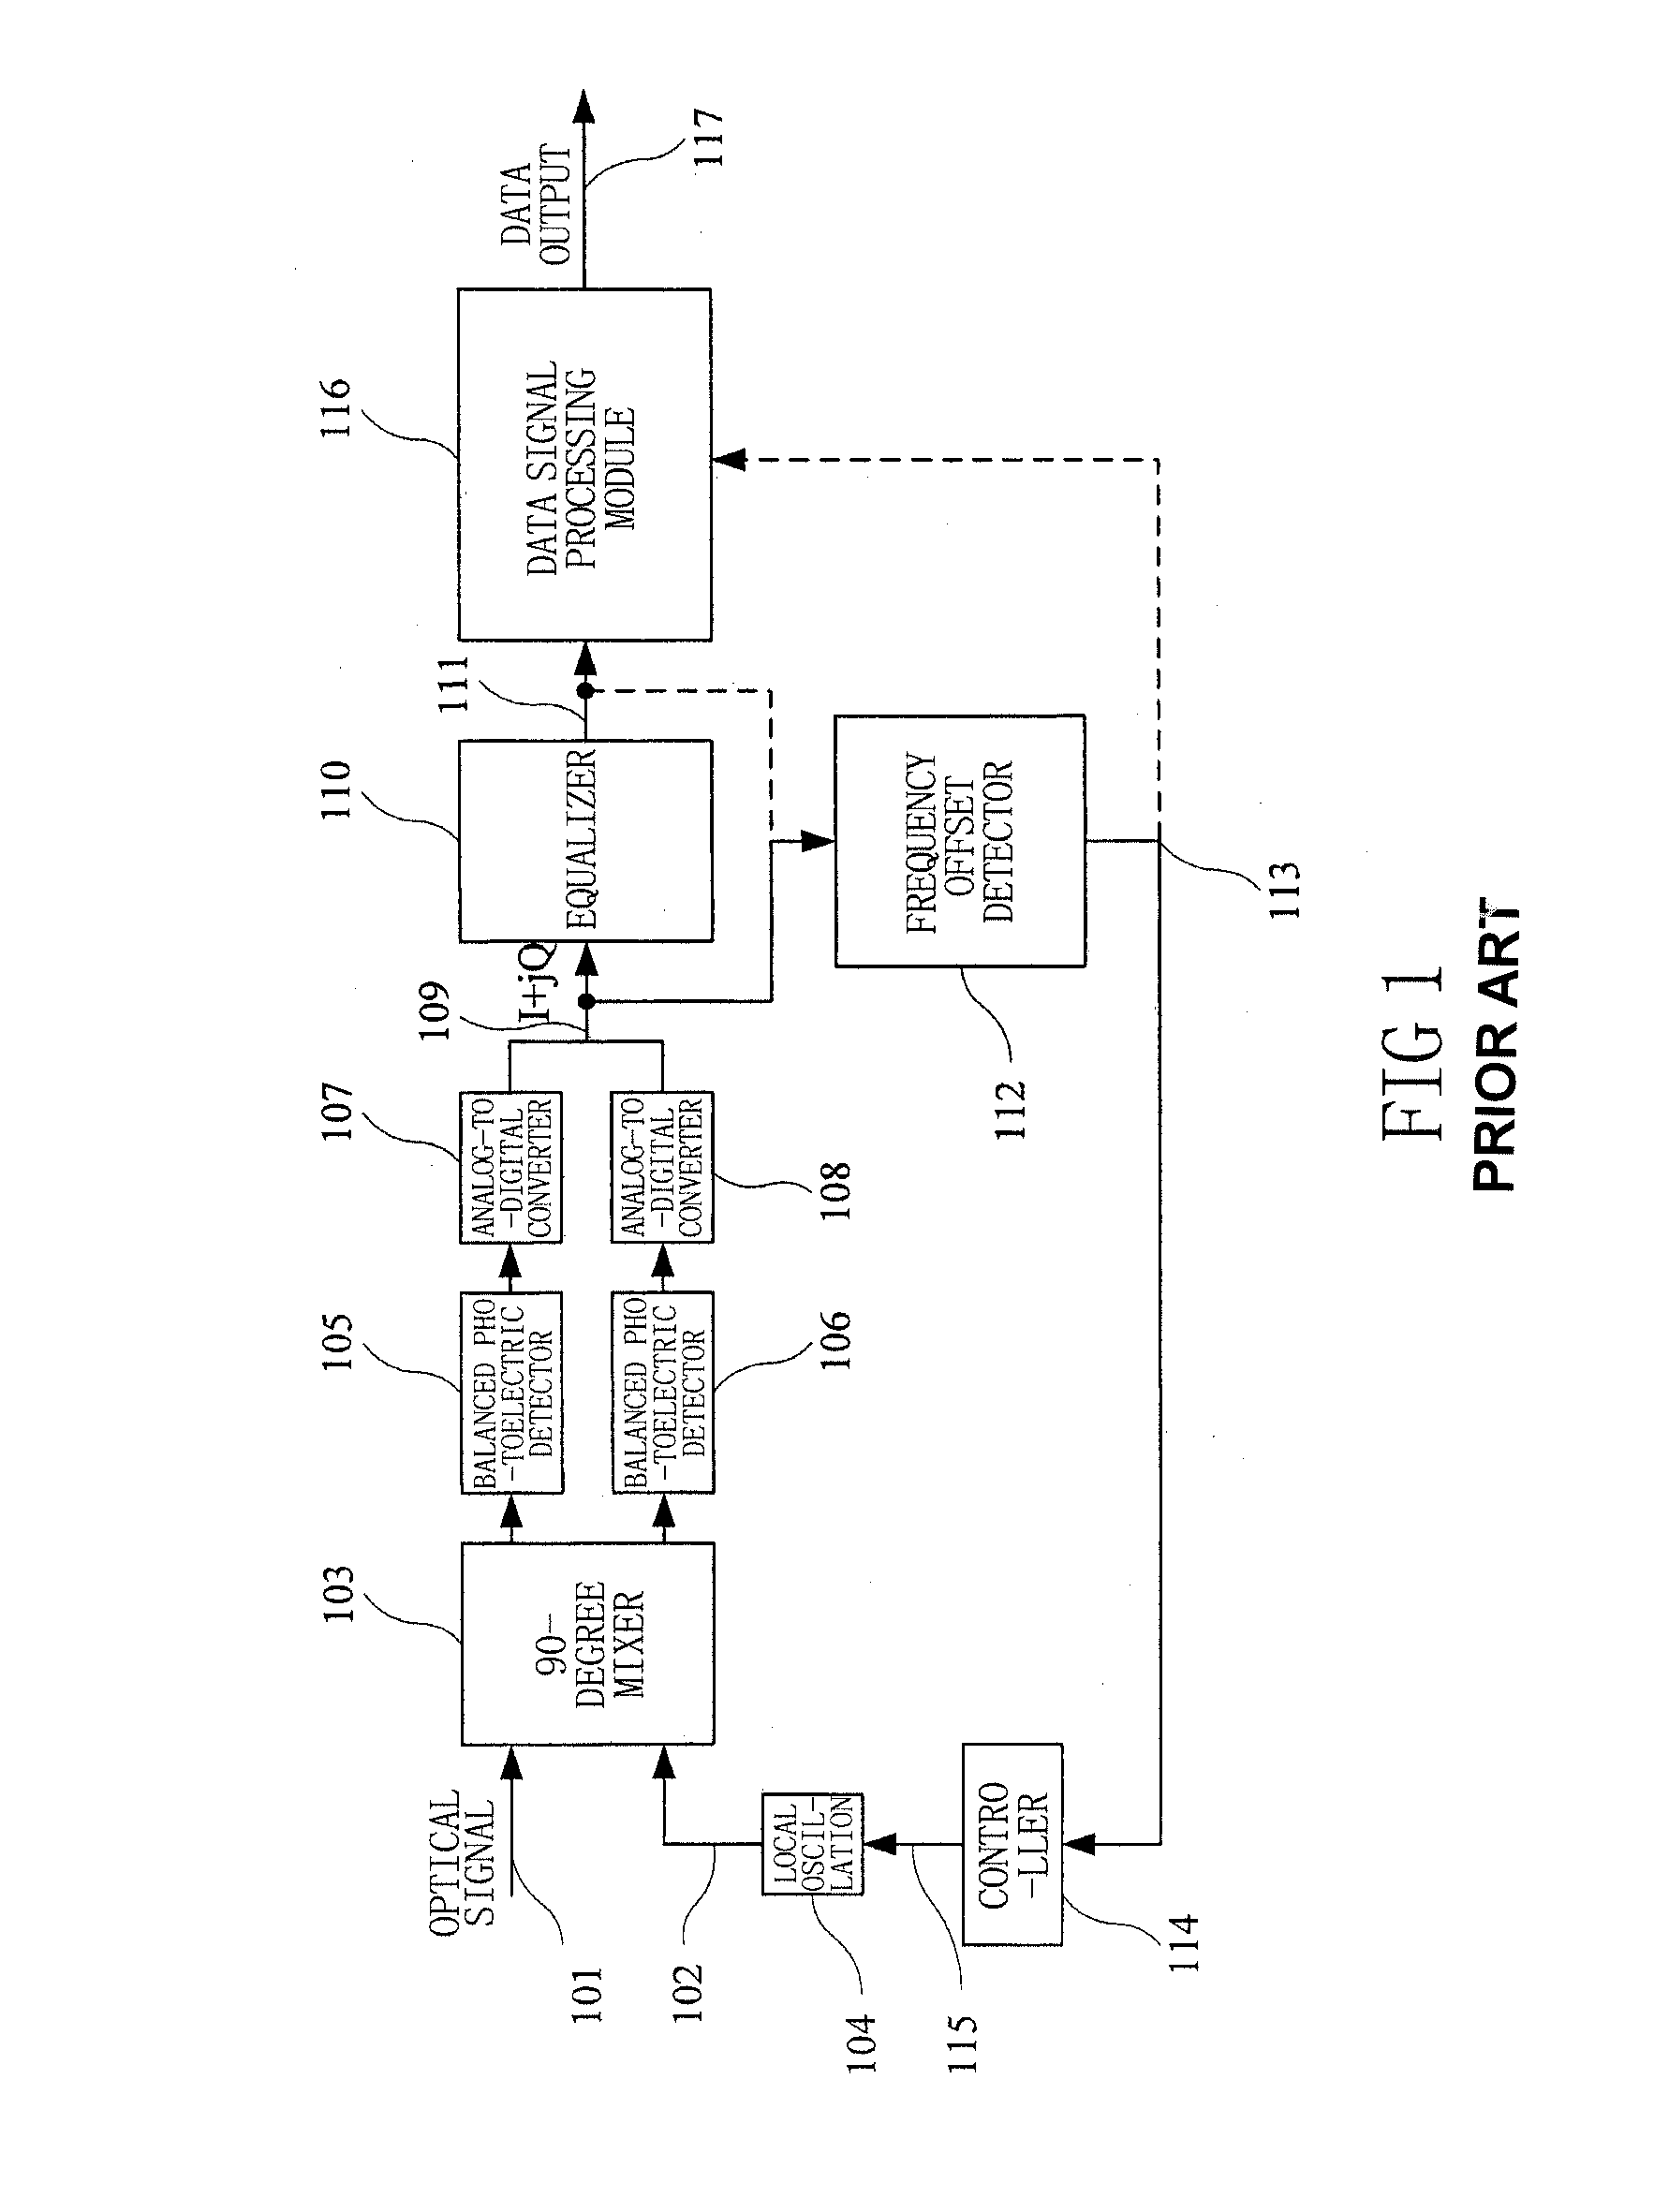 Apparatus and method for frequency offset monitoring used in digital coherent optical receiver